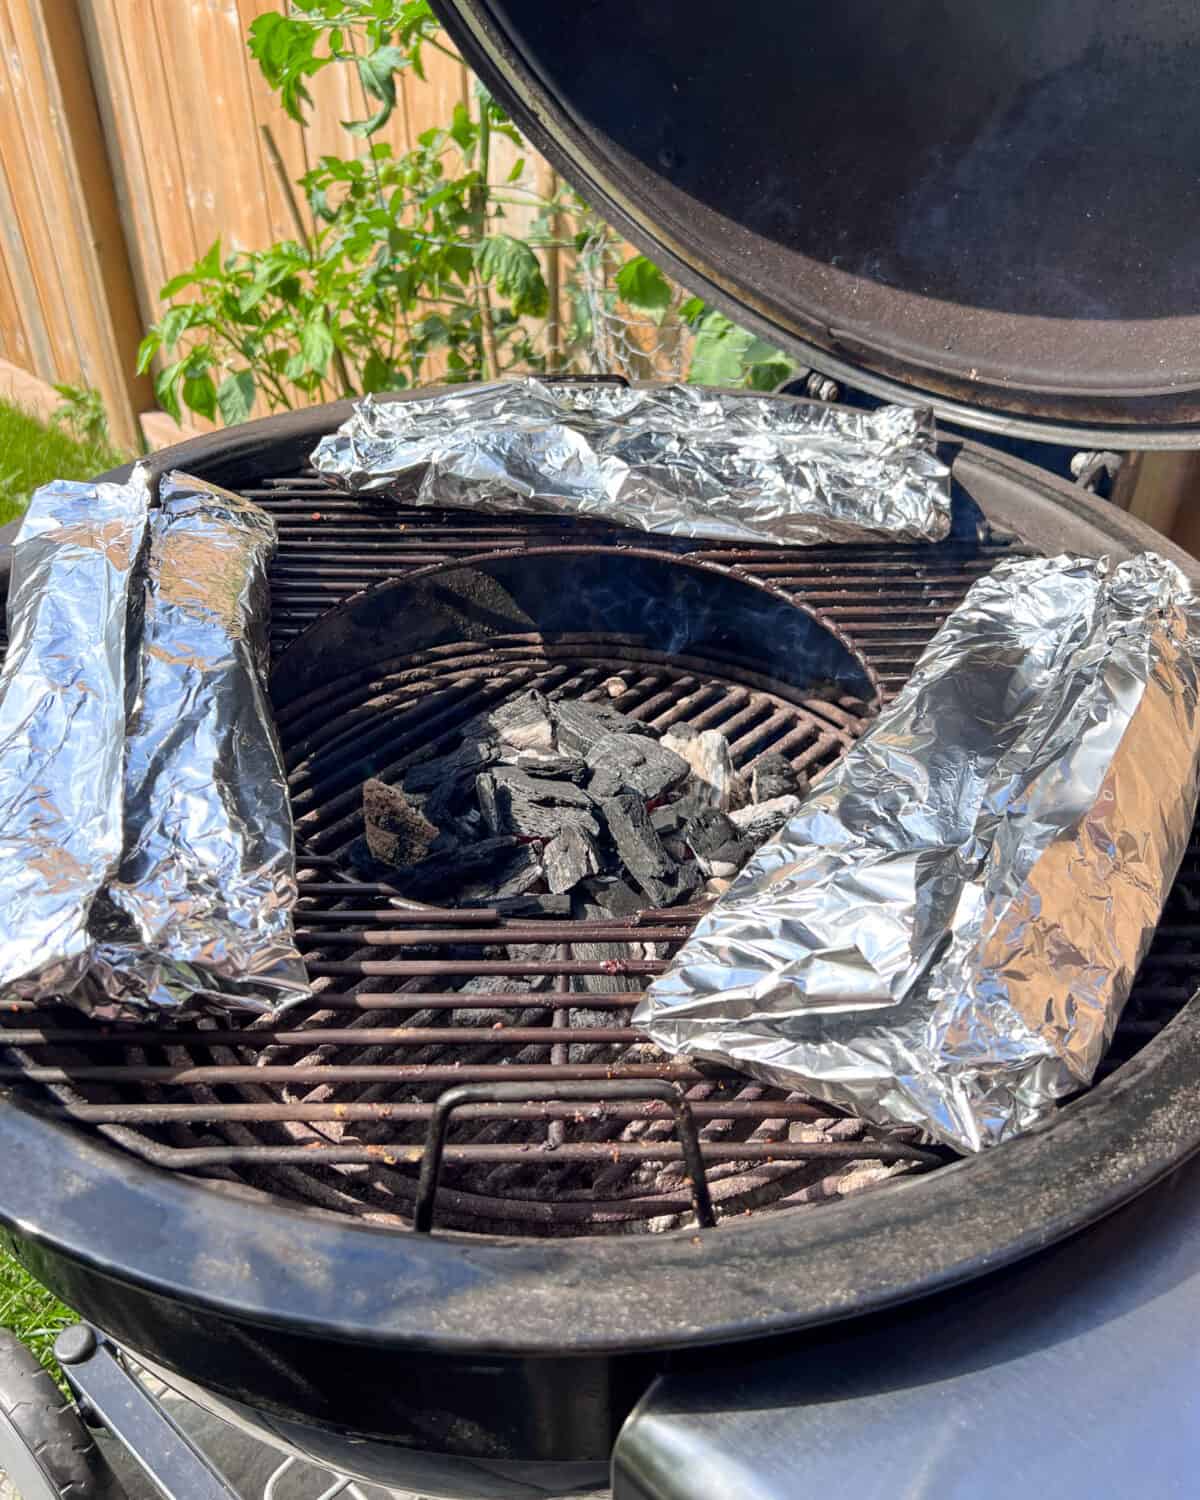 Place the wrapped ribs back over the indirect heat.